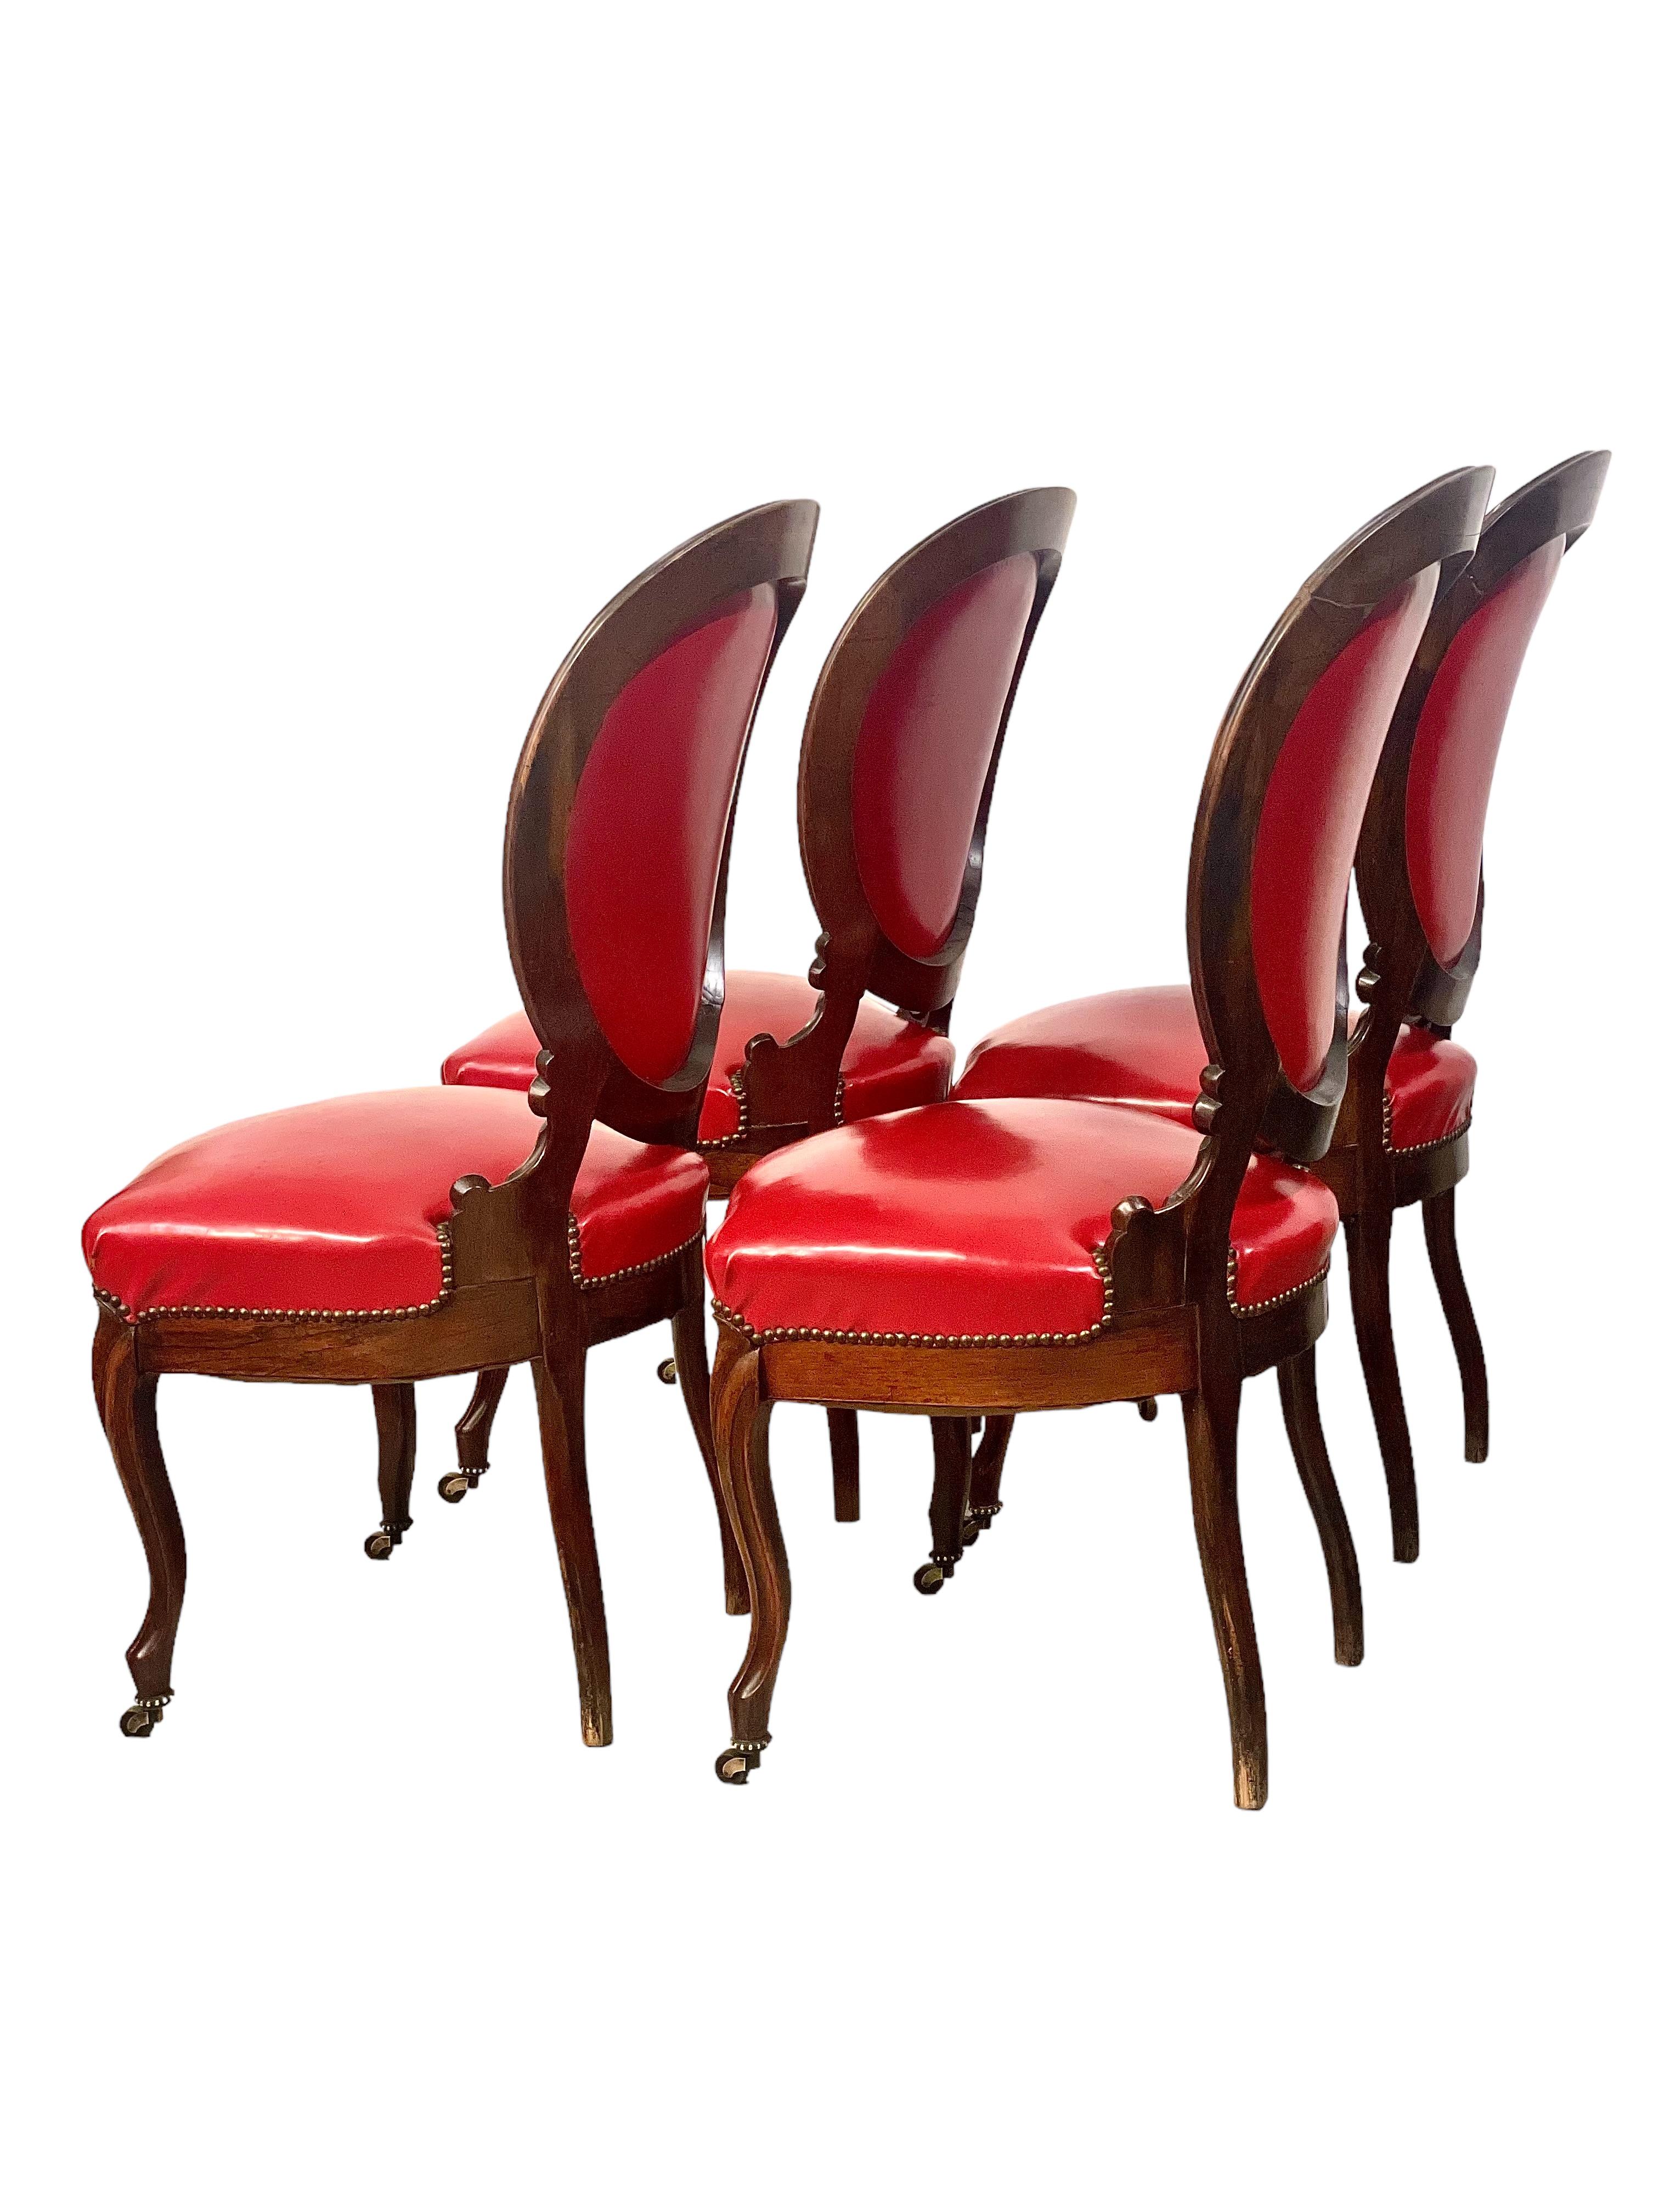 Introducing a set of four exquisite precious wood chairs, embodying the timeless elegance of Napoleon III era, circa 1880. Crafted from rich wood, these chairs boast a captivating medallion back design, seamlessly blending vintage allure with